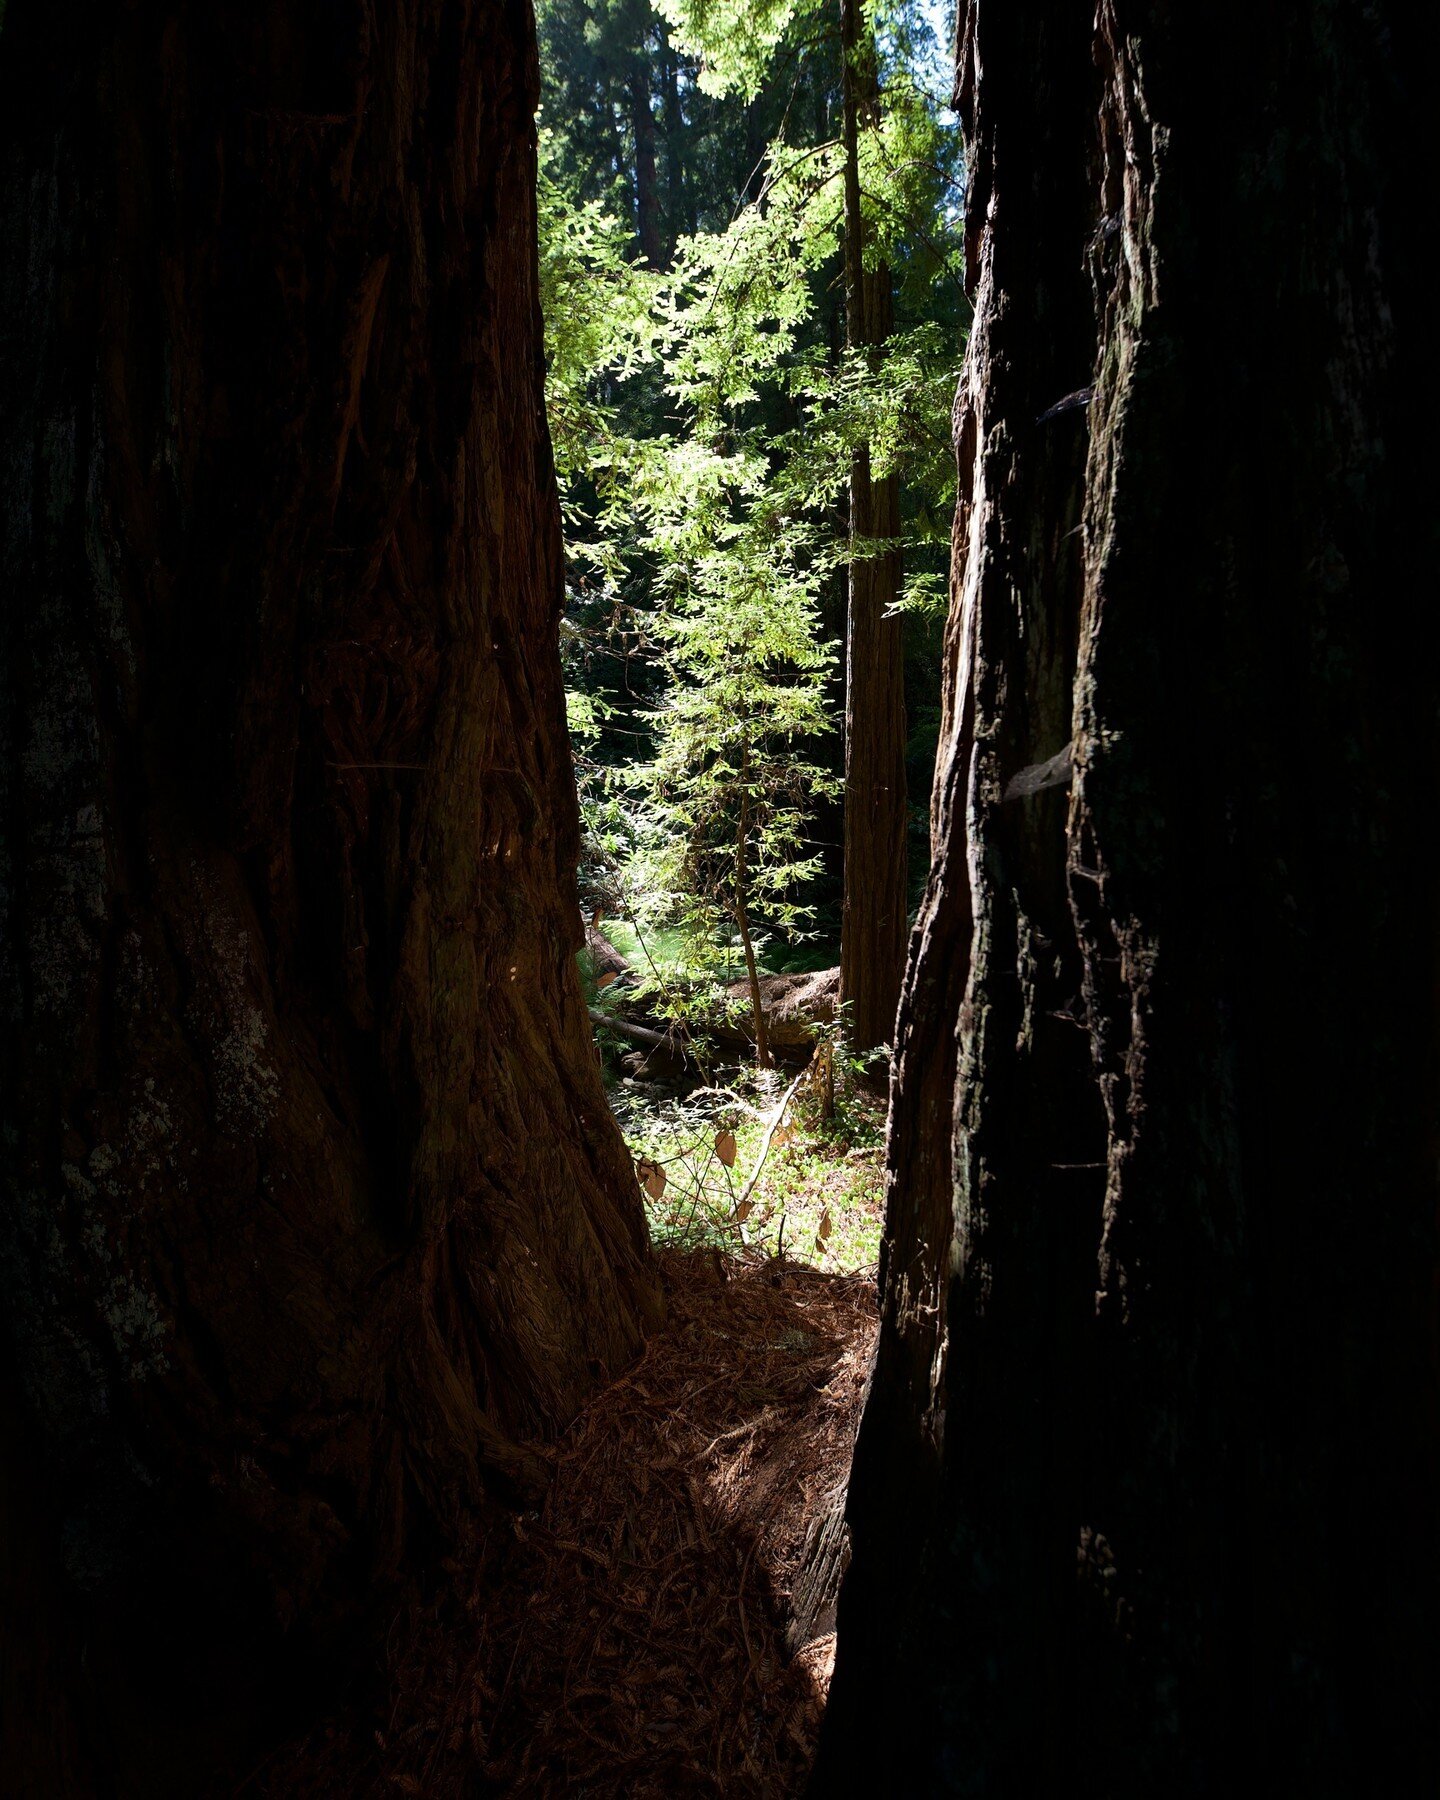 Seeing the forest through the trees. California's redwoods are among the tallest trees on Earth and are sustained by the regular fog that blankets these groves. A shaded walk beneath a tall canopy of green is a welcome change in pace from the cities 